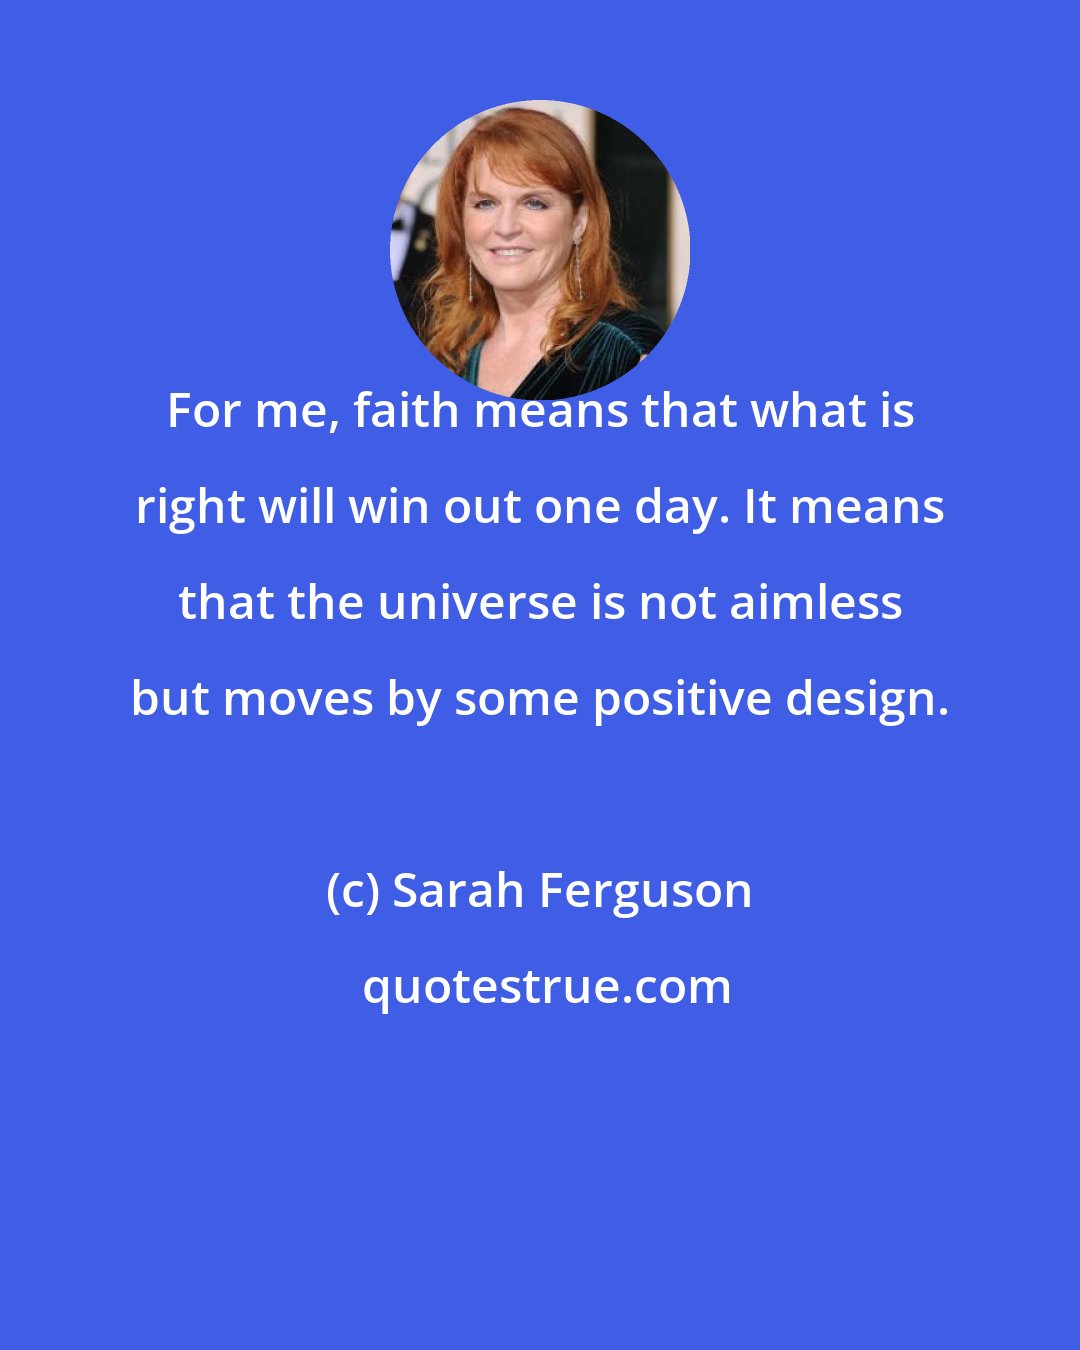 Sarah Ferguson: For me, faith means that what is right will win out one day. It means that the universe is not aimless but moves by some positive design.